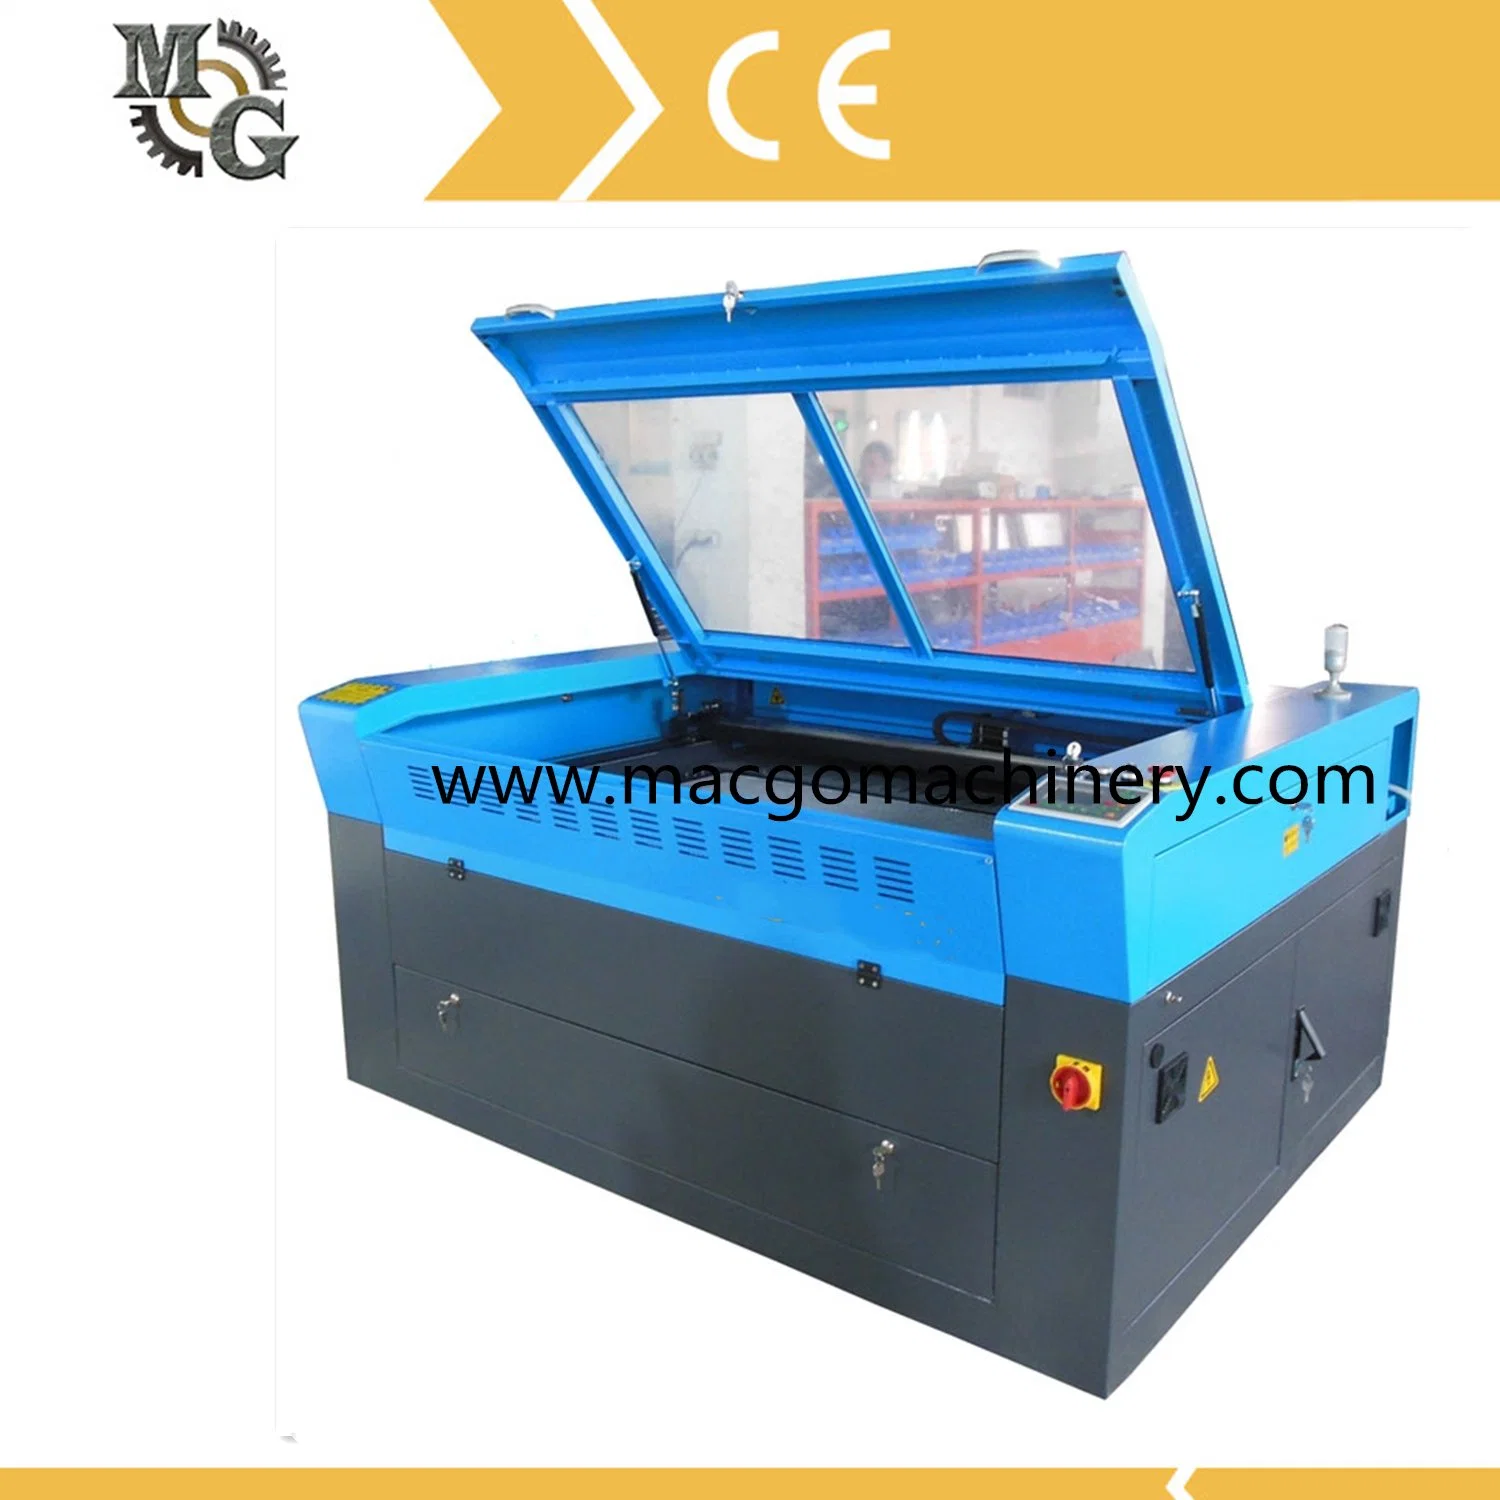 CNC Engraving Cutting Machine for Metal/Nonmental Material